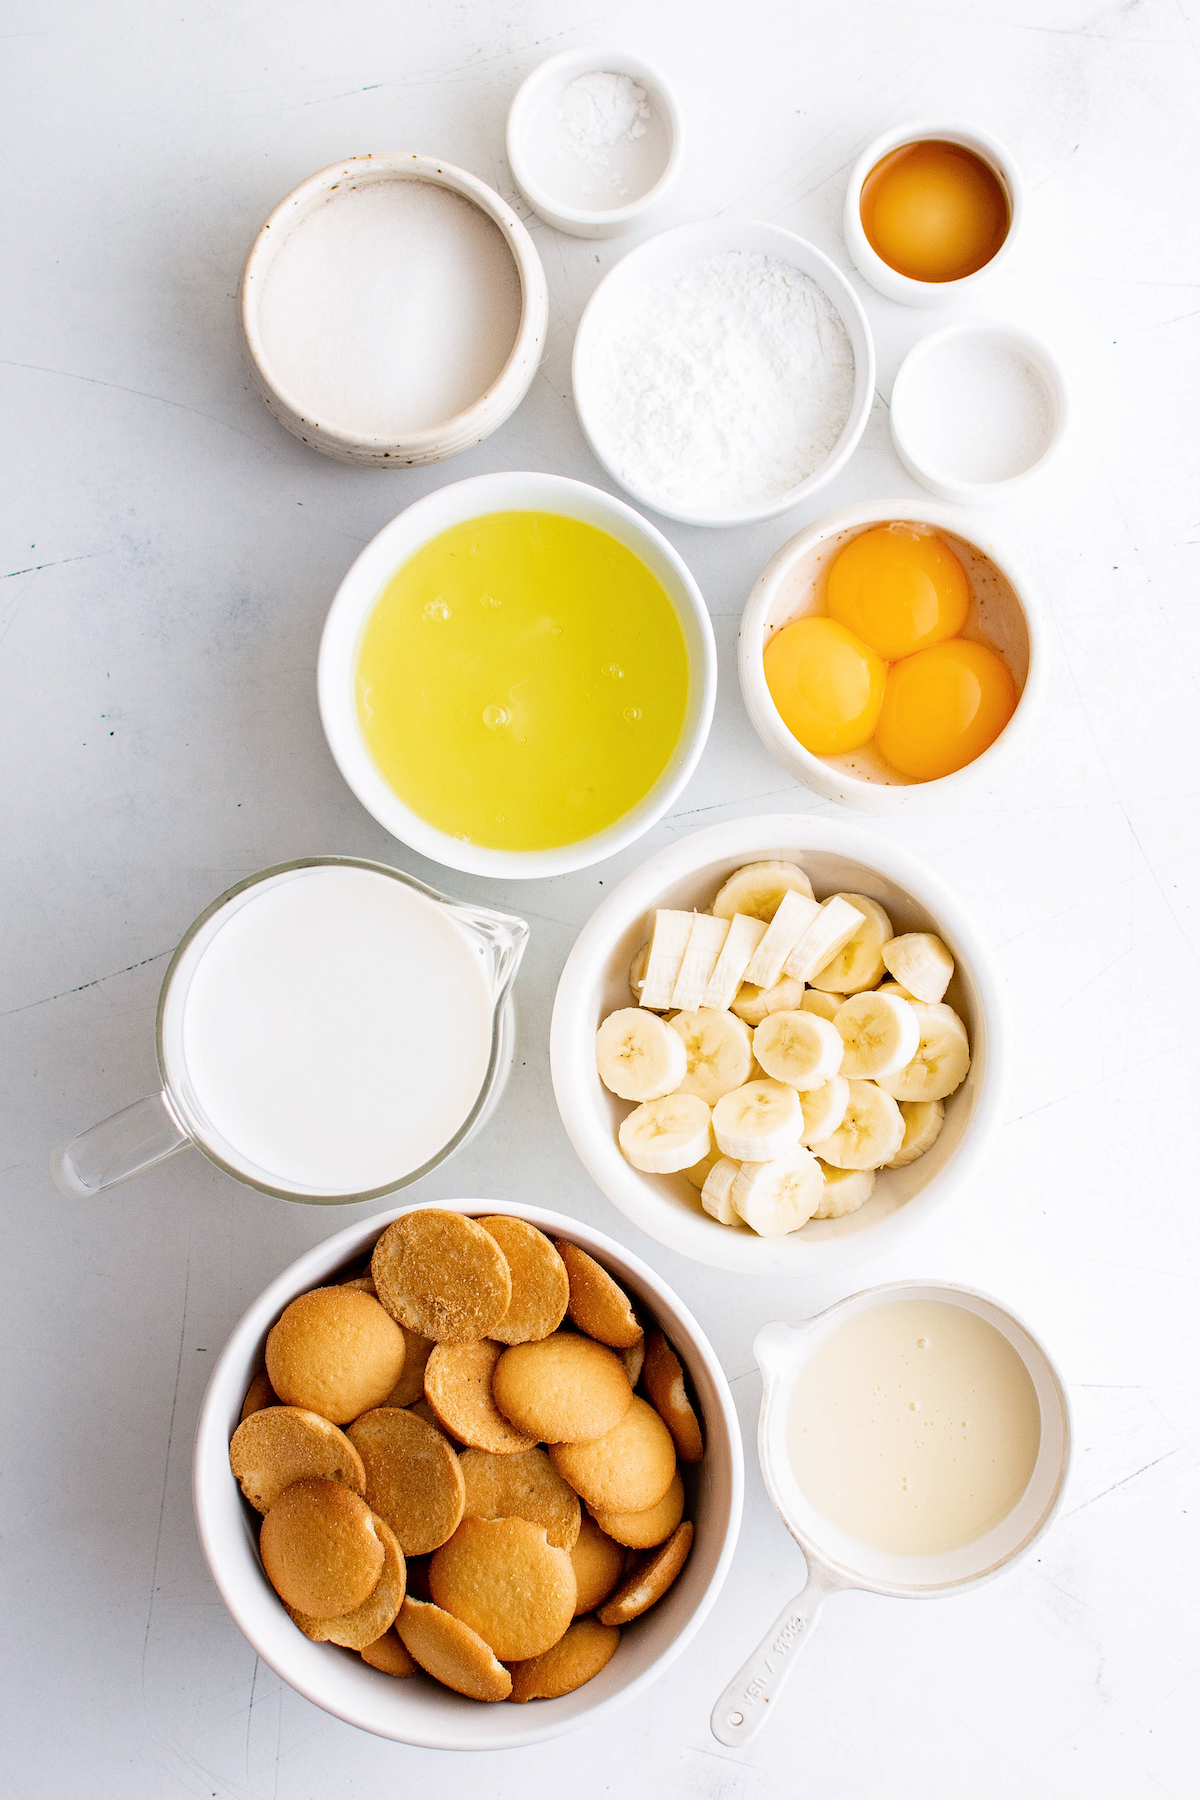 Ingredients for banana pudding.